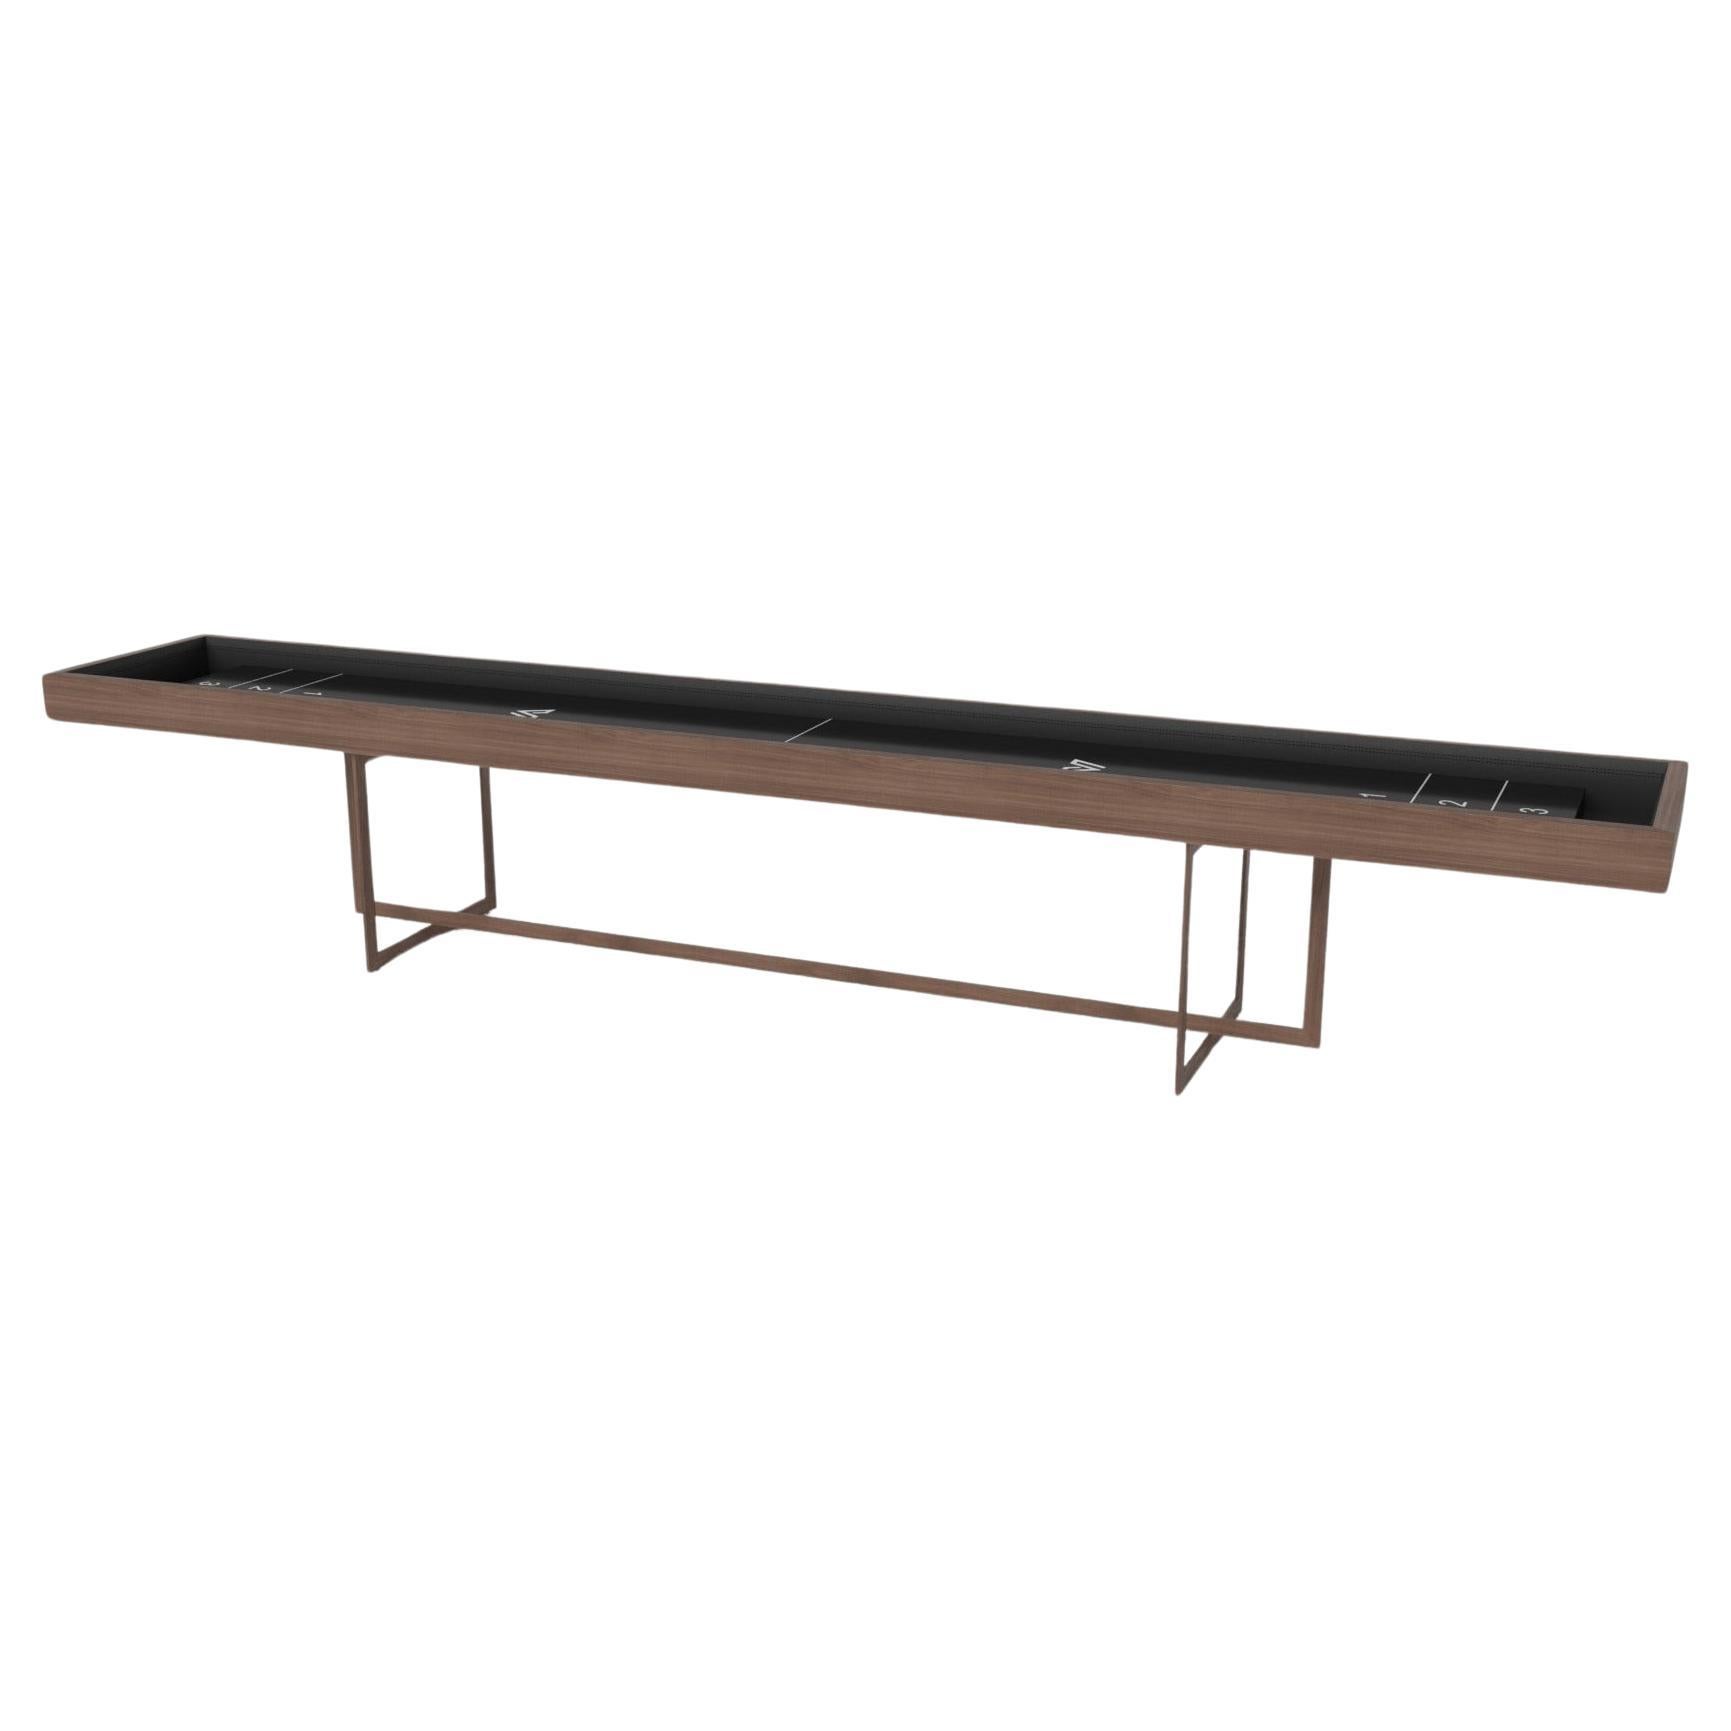 Elevate Customs Beso Shuffleboard Tables / Solid Walnut Wood in 12' -Made in USA For Sale